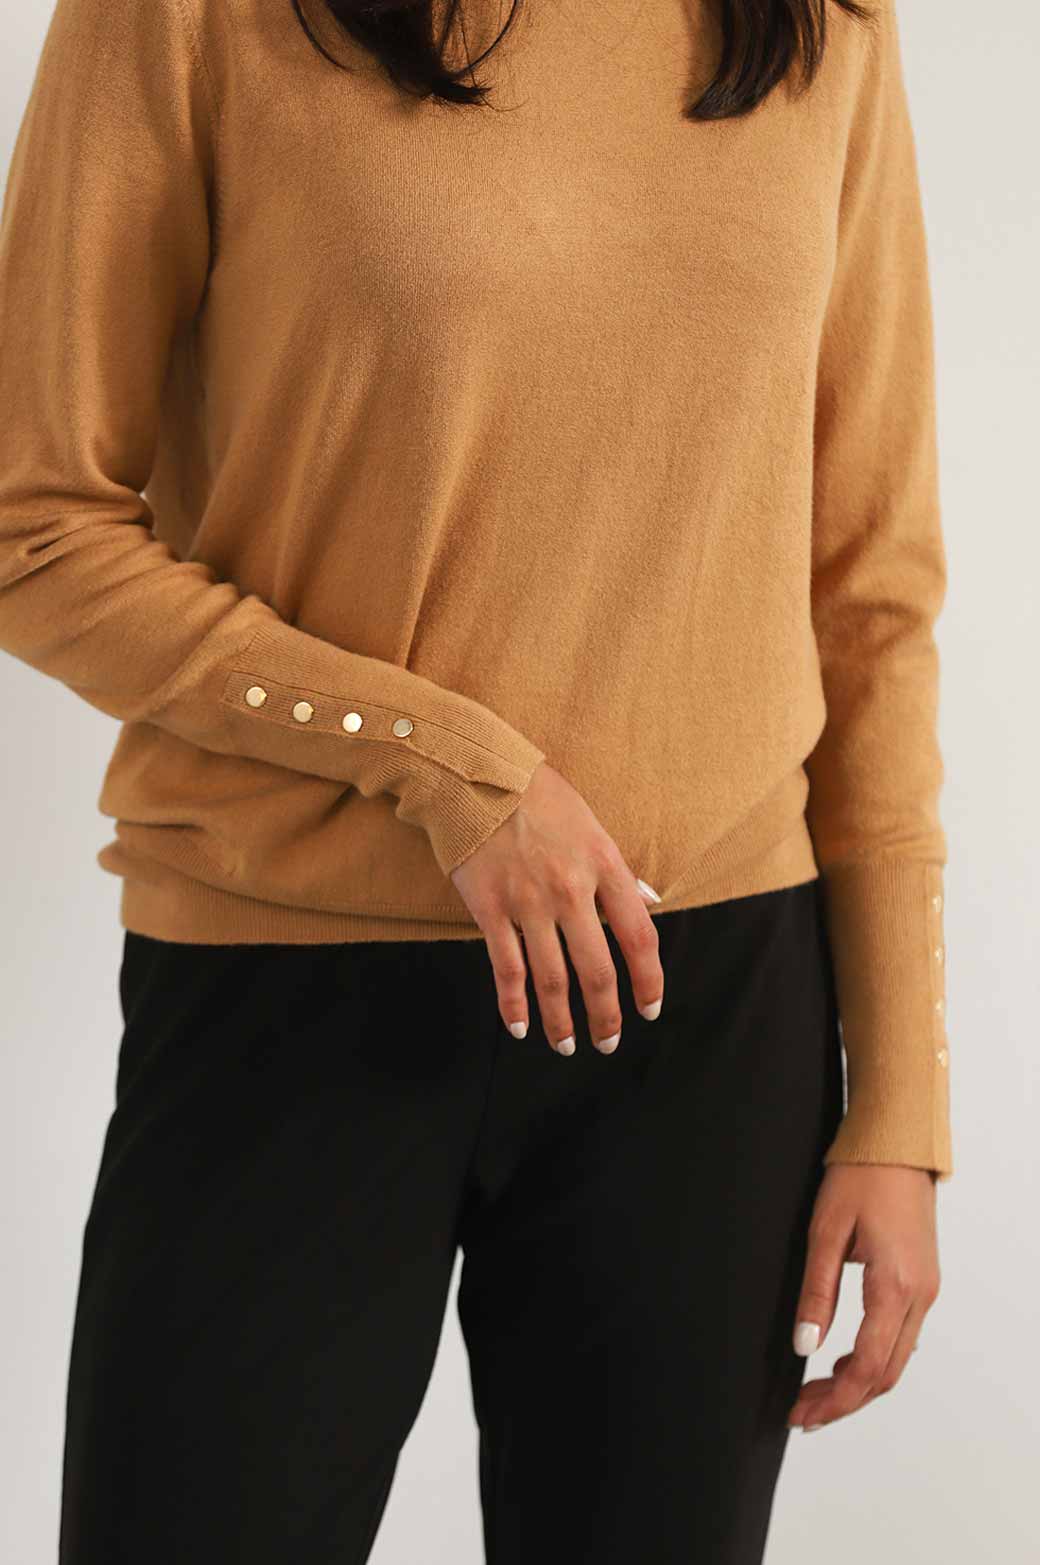 BEIGE JUMPER WITH SLEEVE BUTTONS